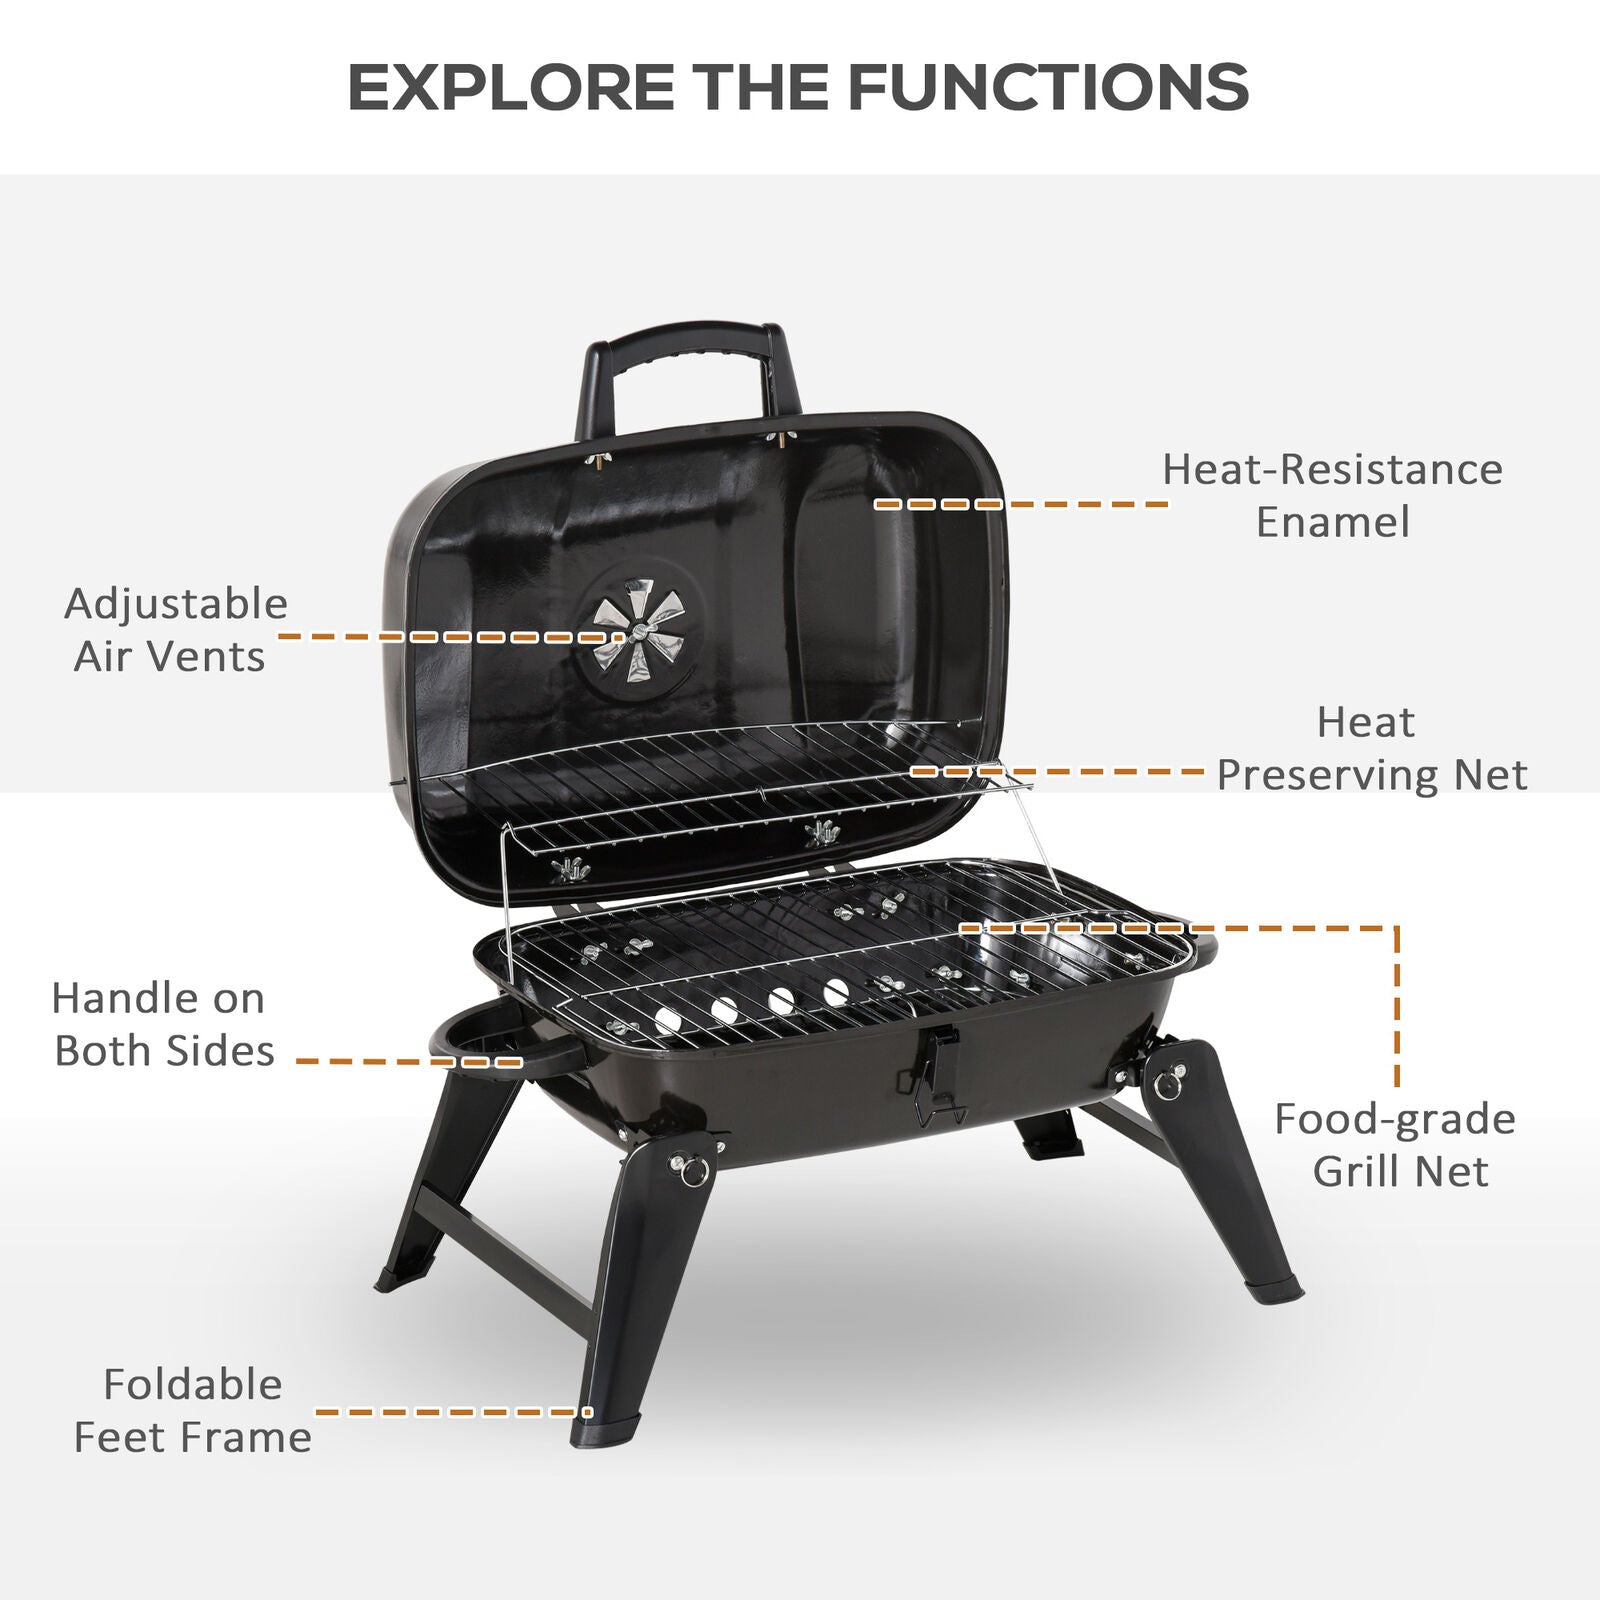 Foldable Tabletop BBQ Grill, Portable Small Charcoal Grill, Mini Tabletop Smoker Camping Cooker, Stainless Steel Portable Collapsible Barbecue Shelf